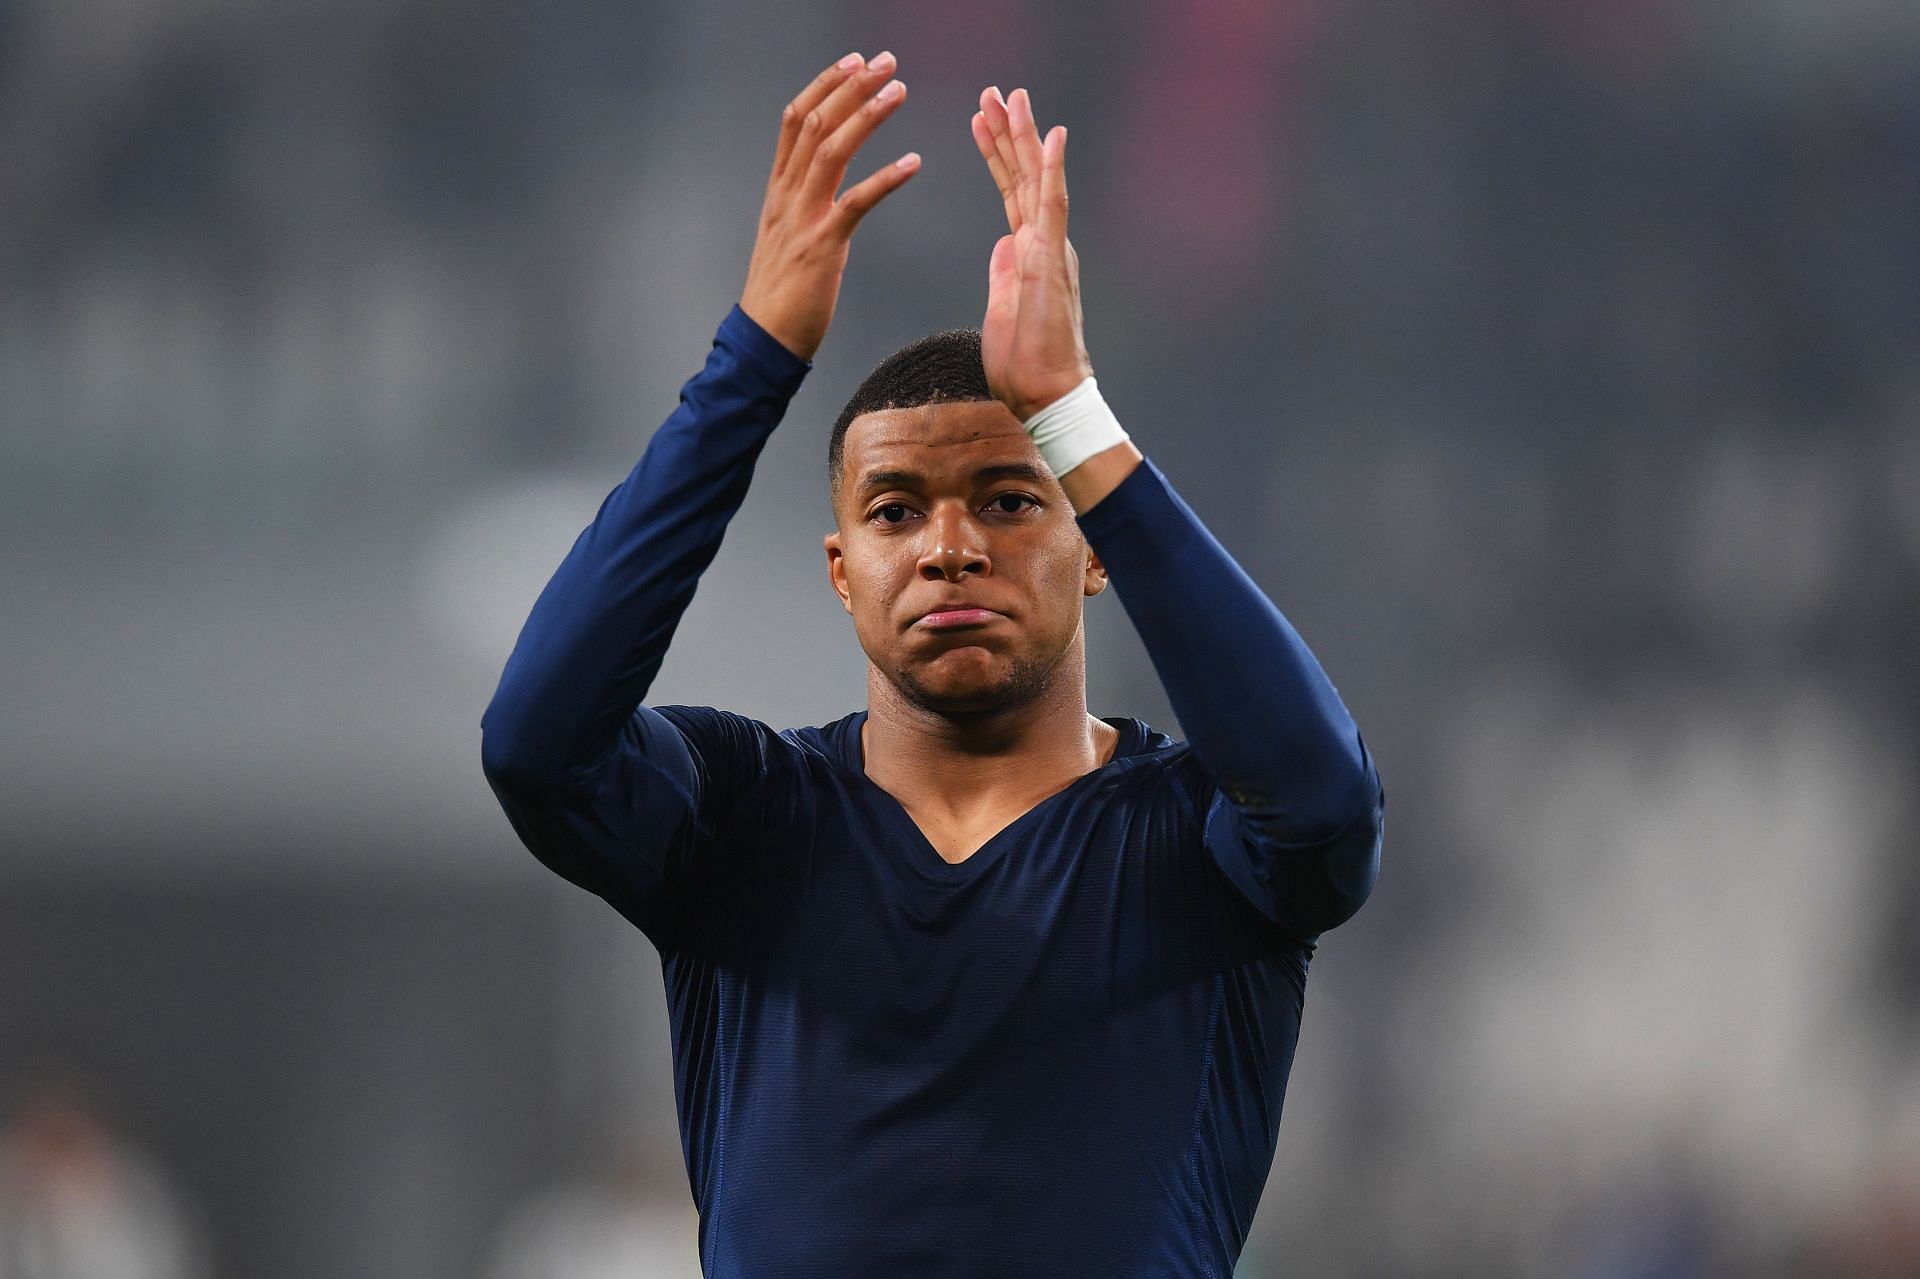 "The club works very strangely" - PSG are only pursuing French attacker due to Kylian Mbappe's demands, says Daniel Riolo